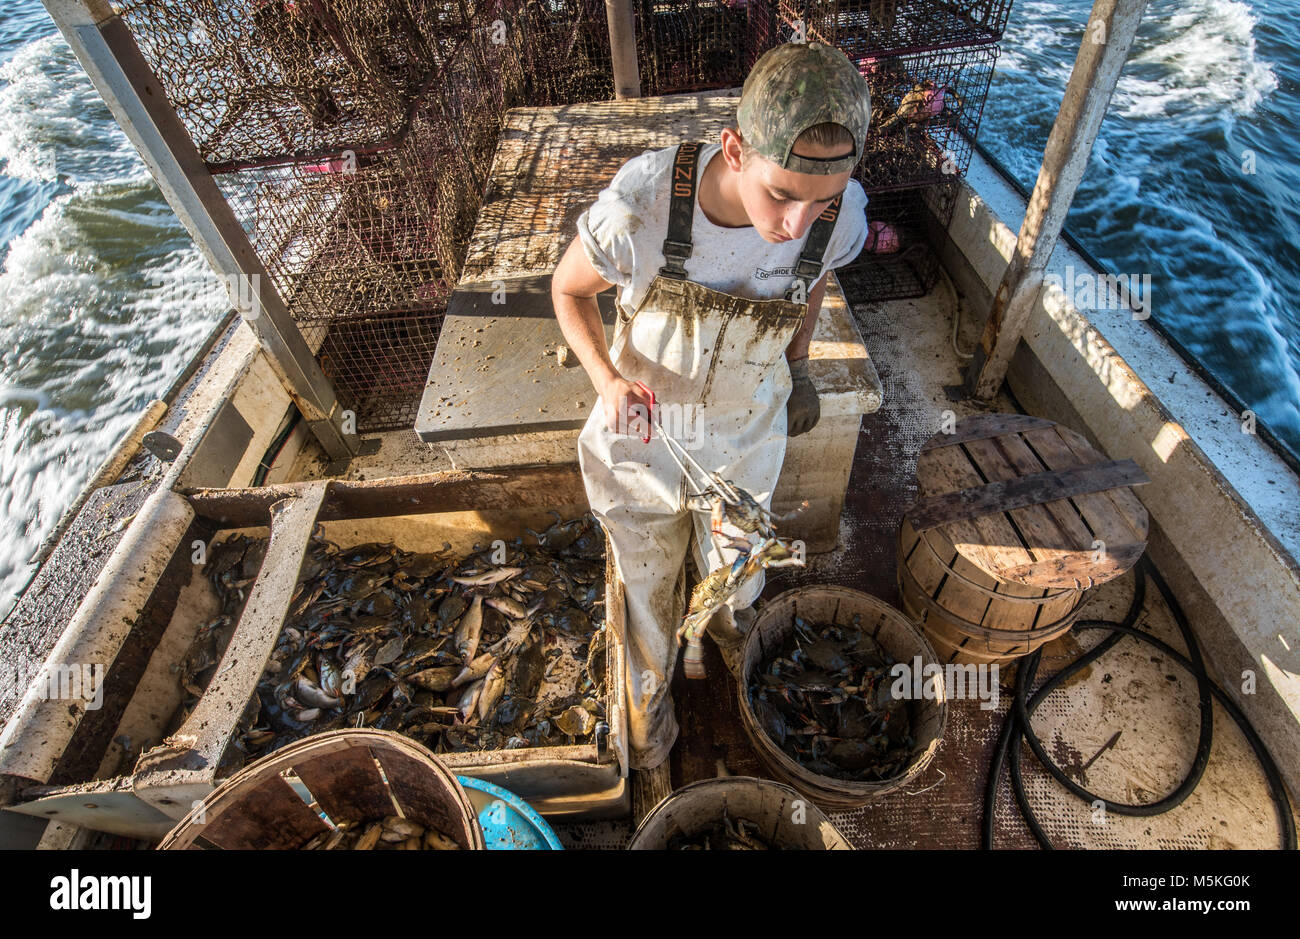 Young waterman uses thongs to examine freshly caught Chesapeake blue crab while standing on boat in the Chesapeake Bay, Dundalk, Maryland. Stock Photo